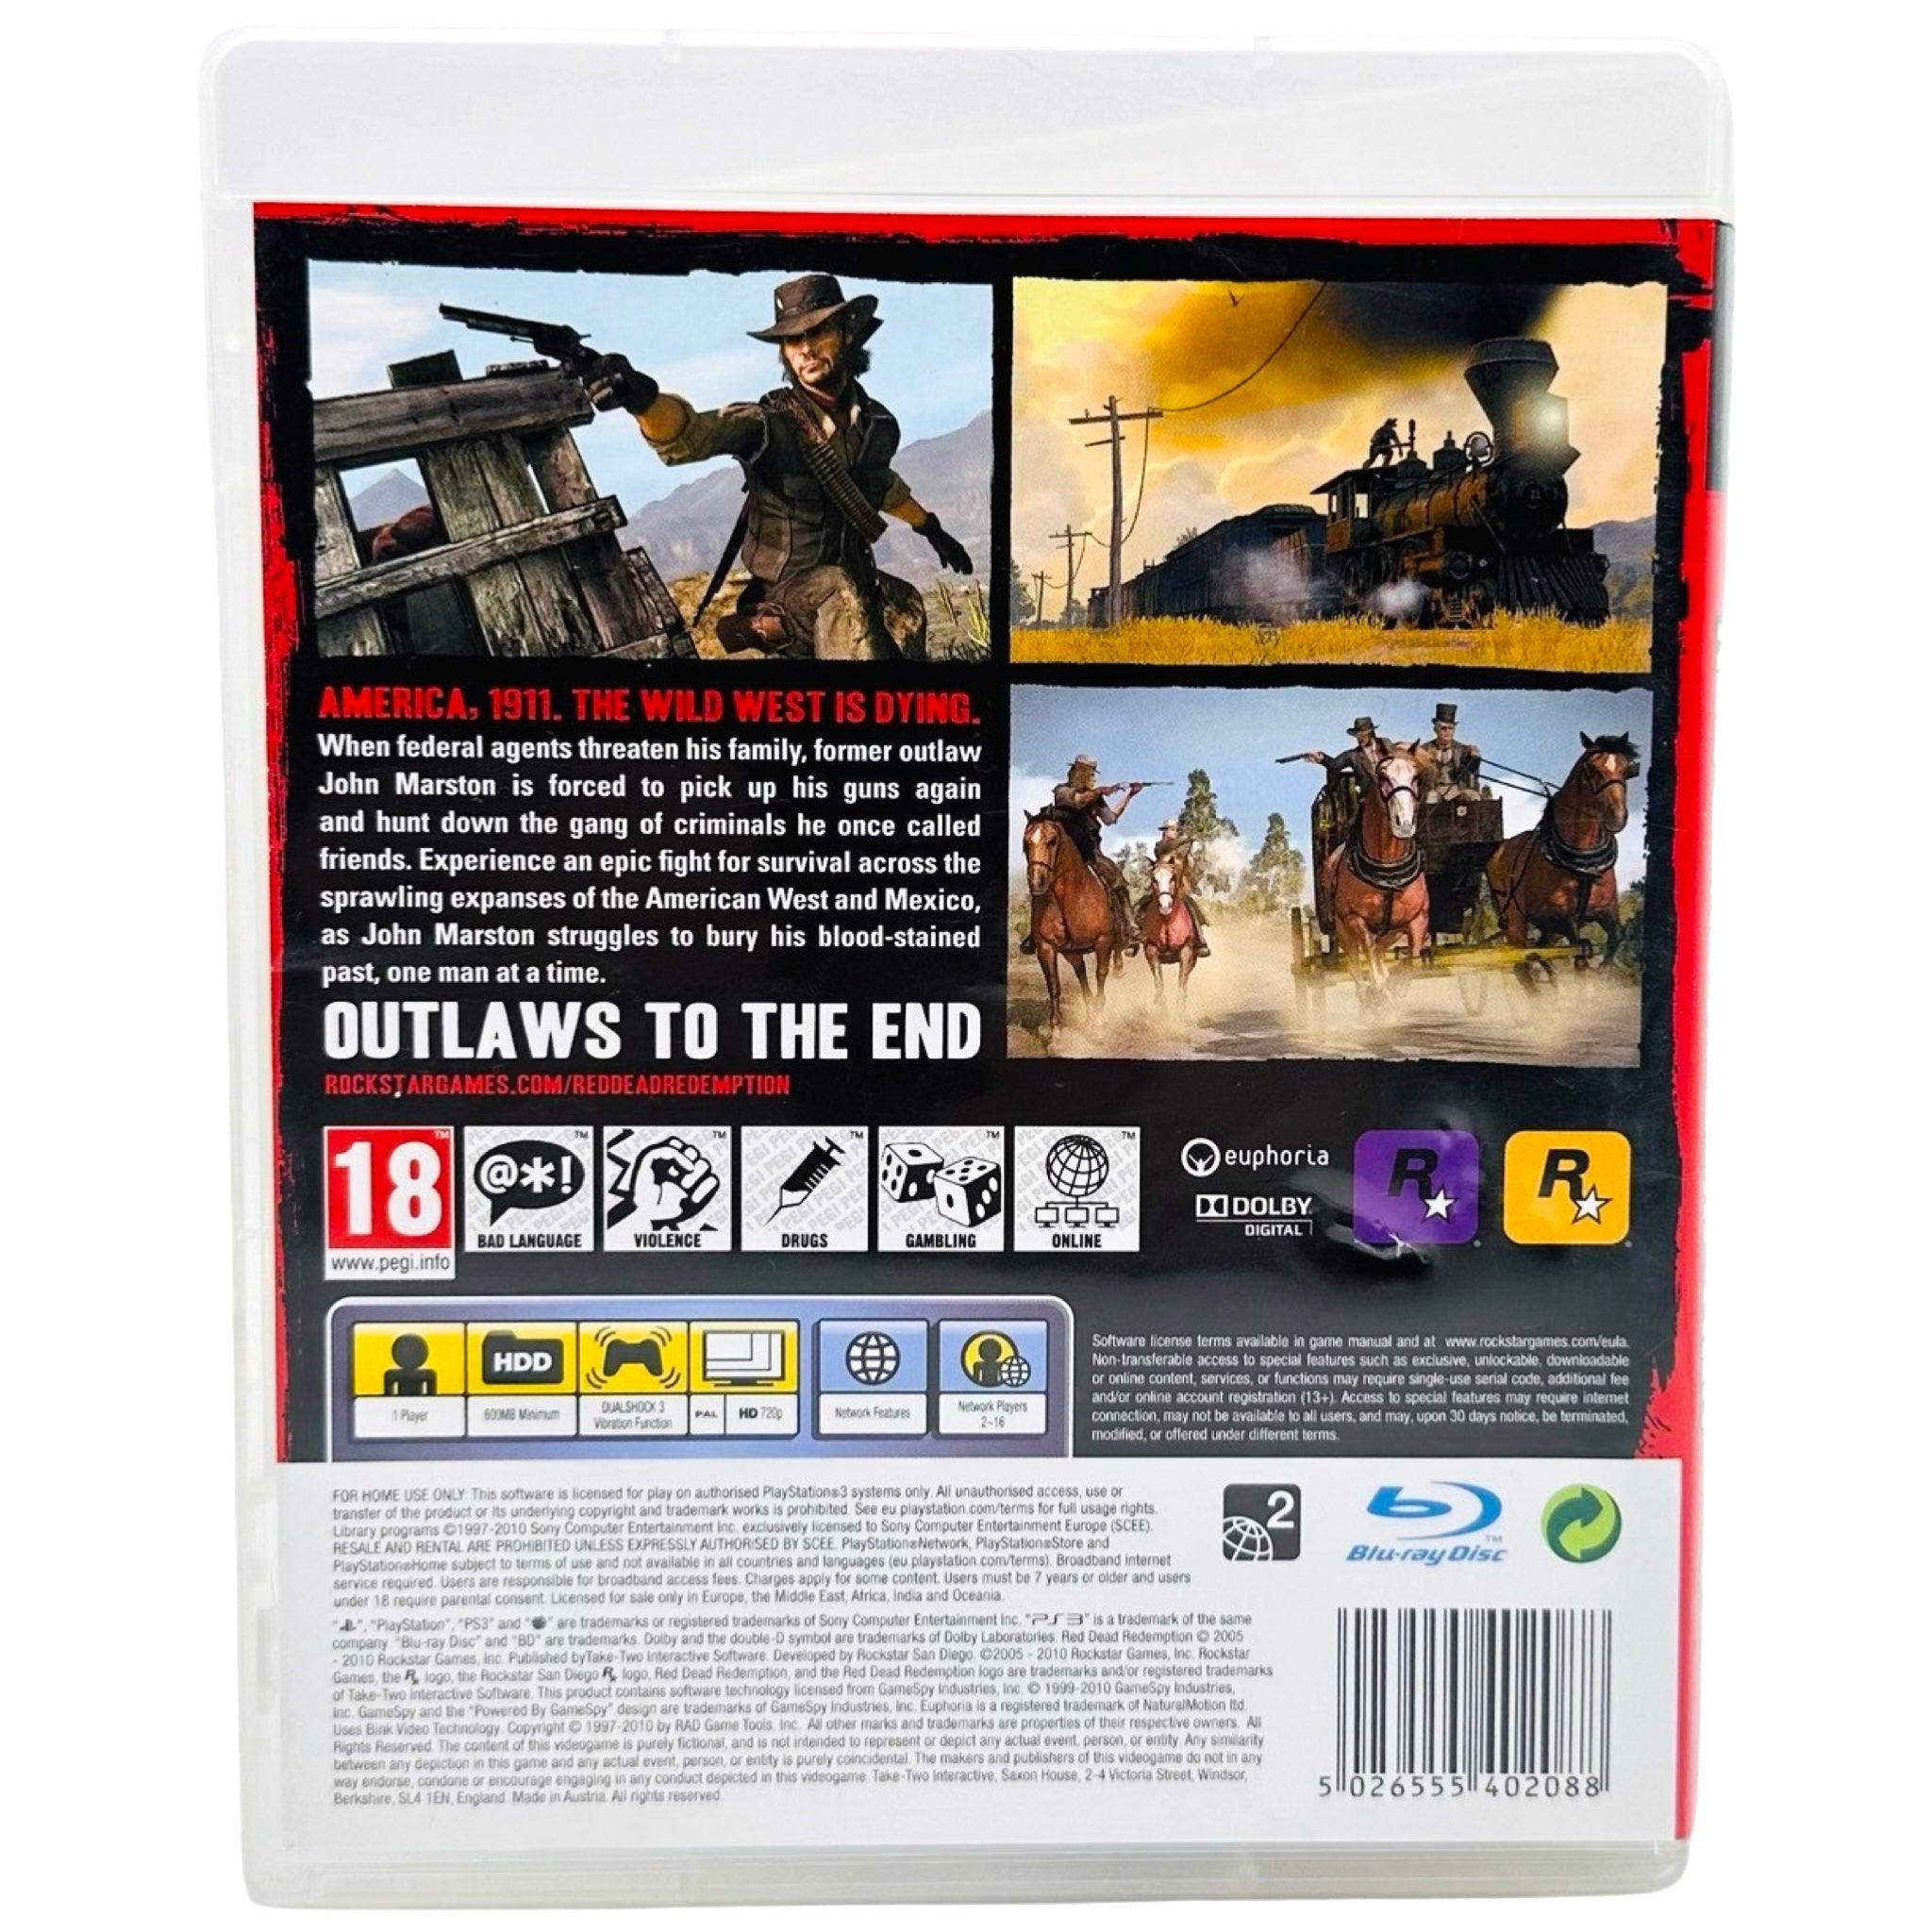 PS3: Red Dead Redemption - RetroGaming.no